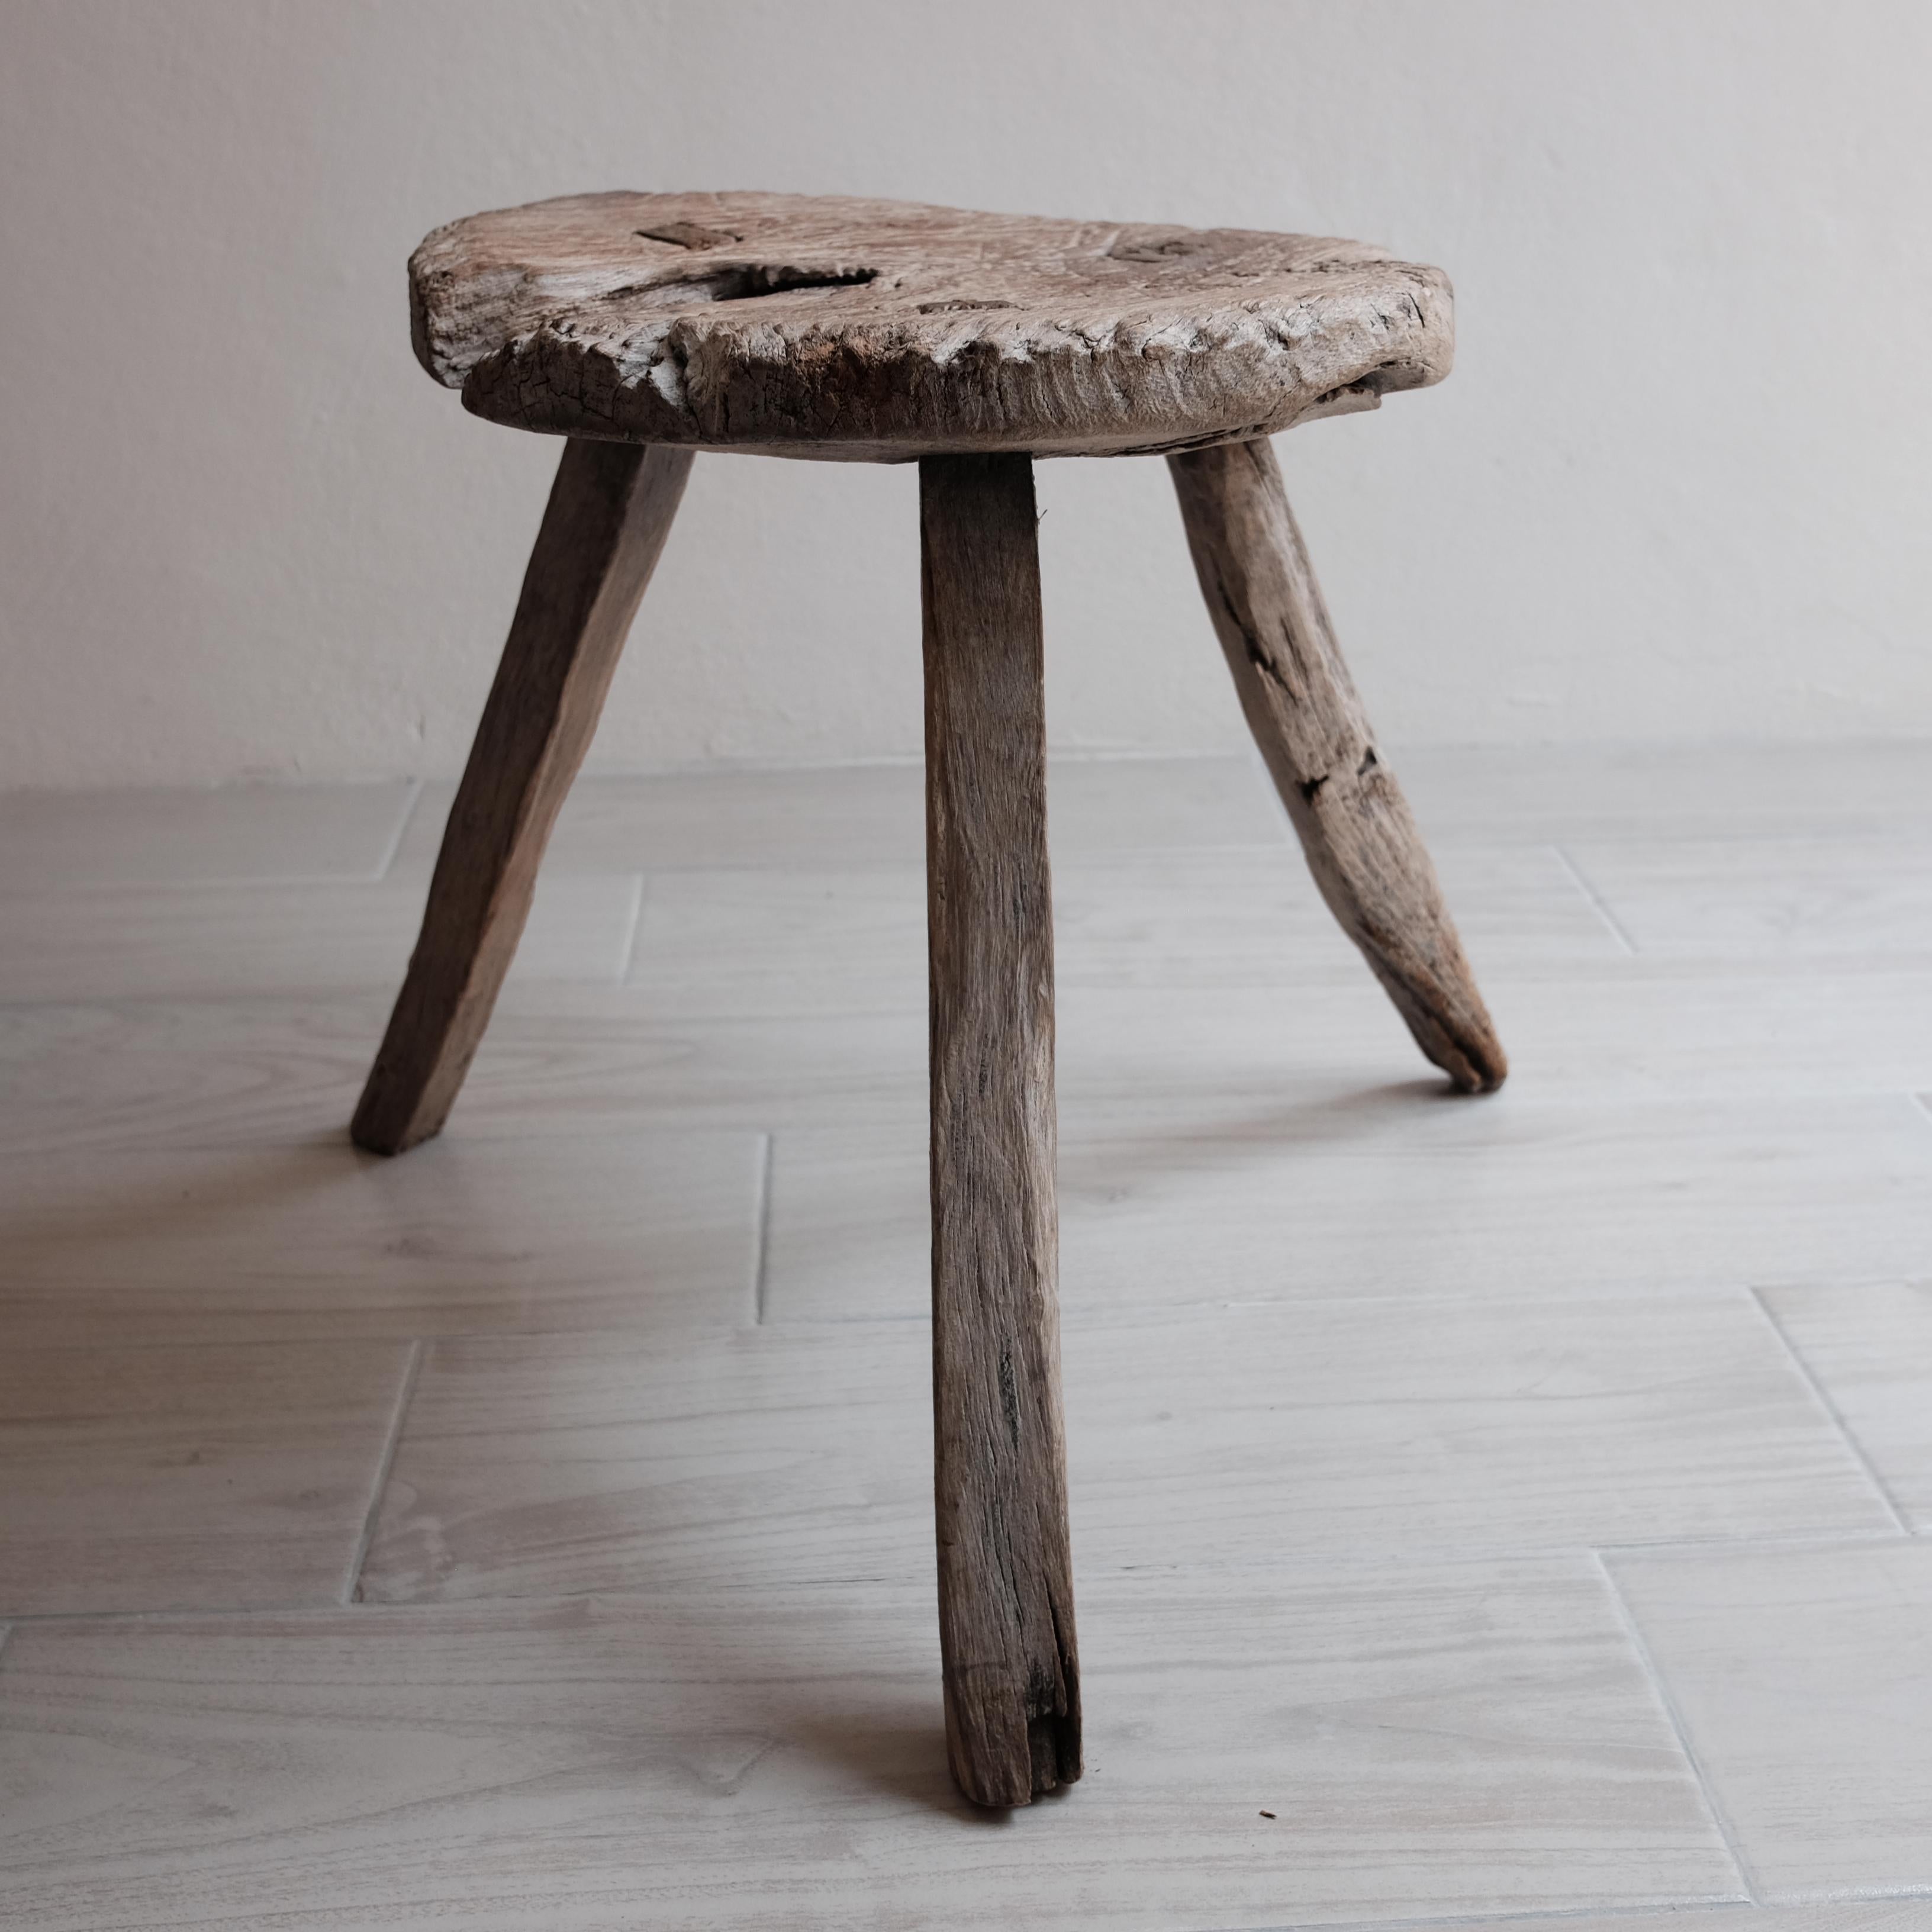 Hand-Crafted Mesquite Stool from Mexico, 1950s